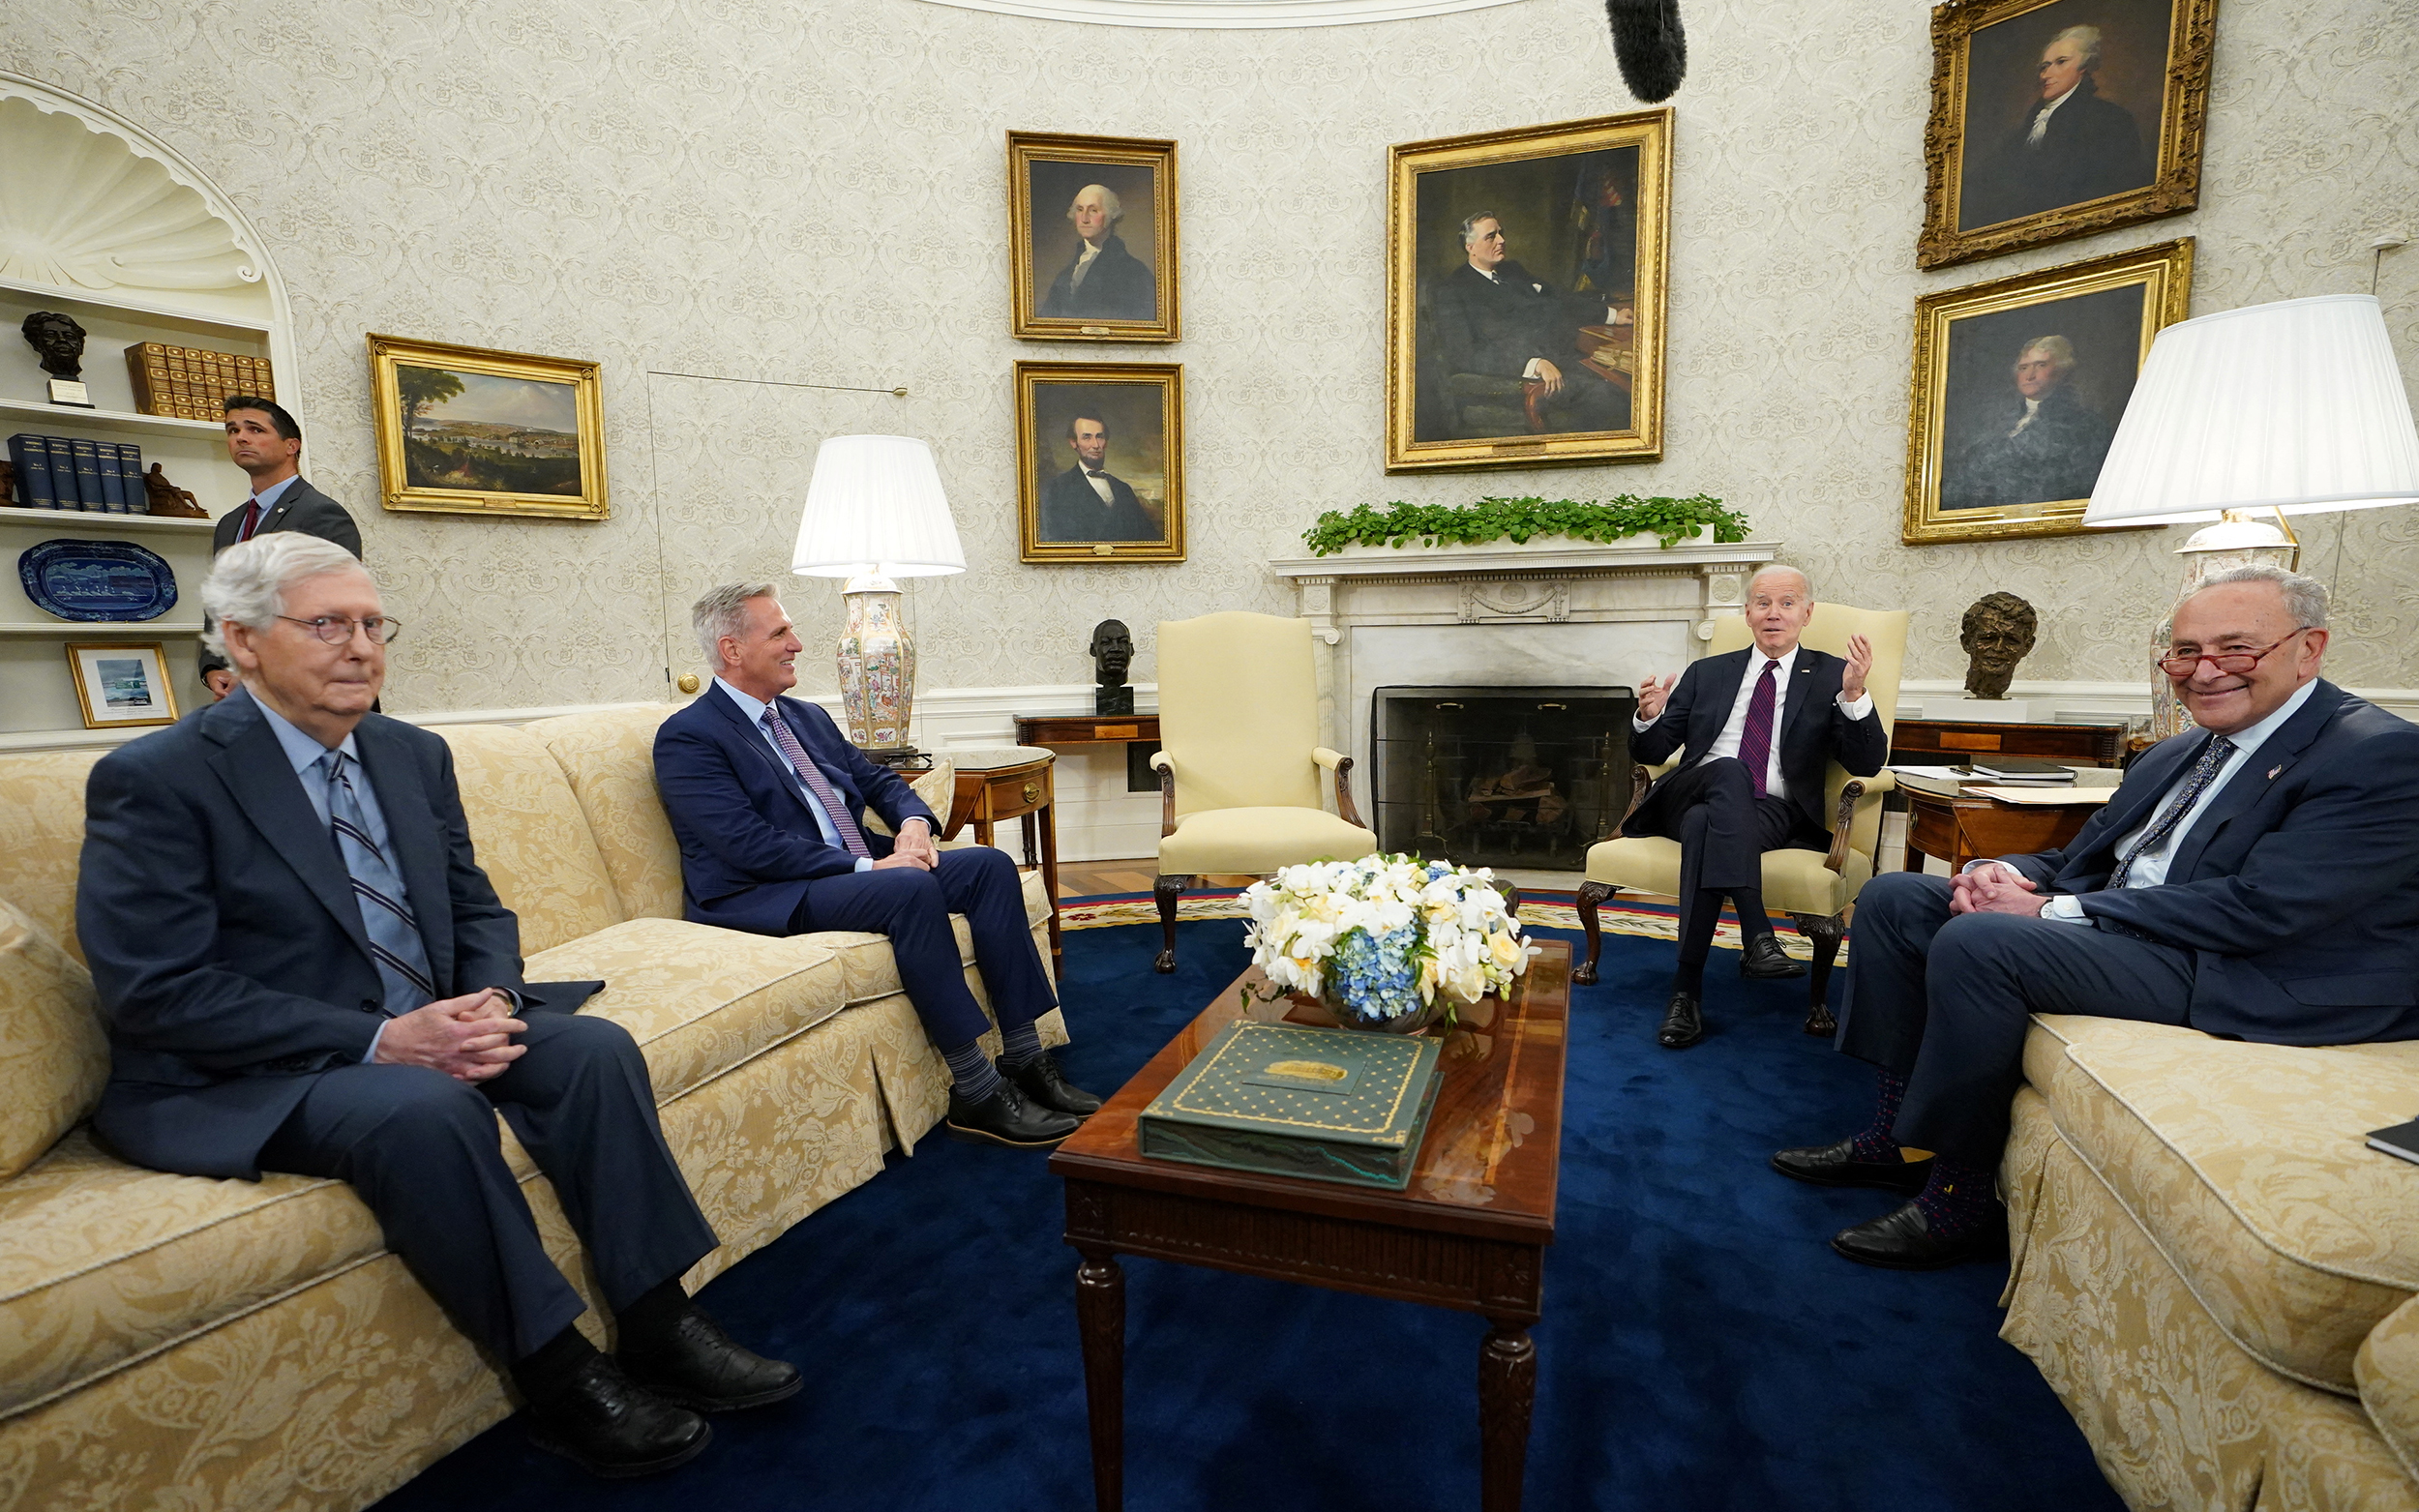 President Joe Biden hosts debt limit talks with House Speaker Kevin McCarthy (R-CA), Senate Minority Leader Mitch McConnell (R-KY) and Senate Majority Leader Chuck Schumer (D-NY) in the Oval Office at the White House in Washington, on May 9.